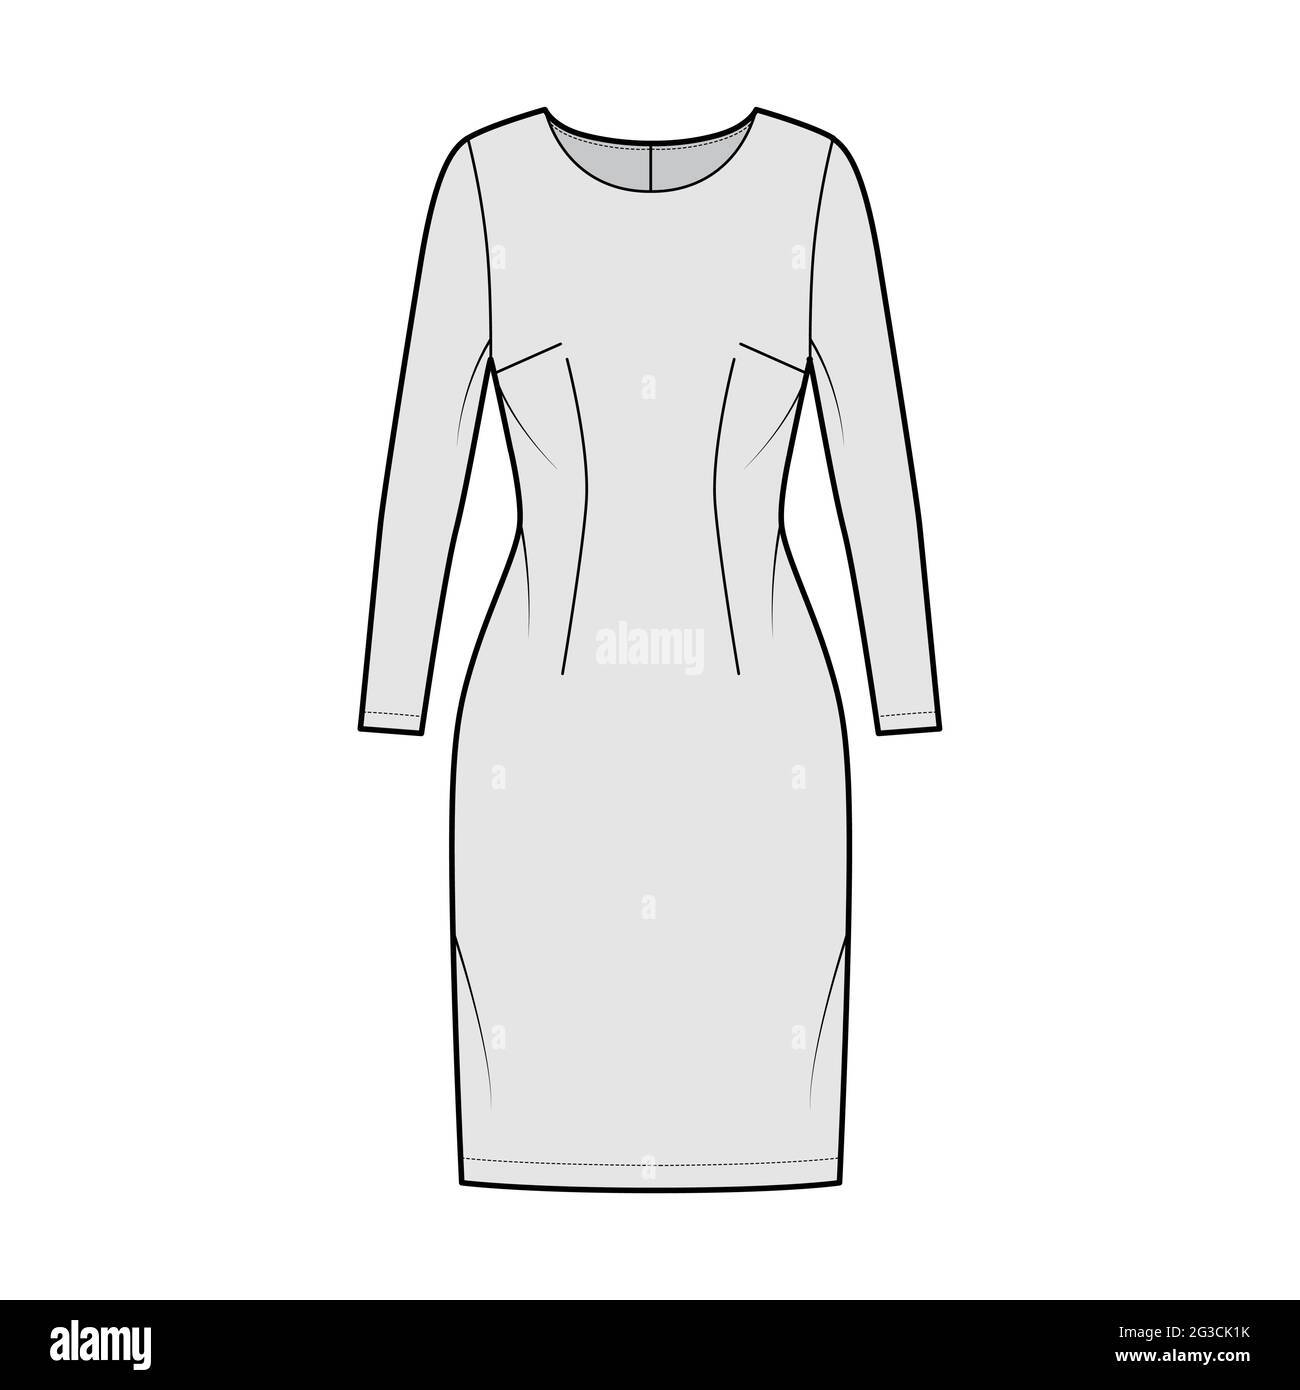 Digital Collections  Sleeveless cocktail sheath dress with embroidered  scallop trim at bateau neckline matching stole with scallop trim edging